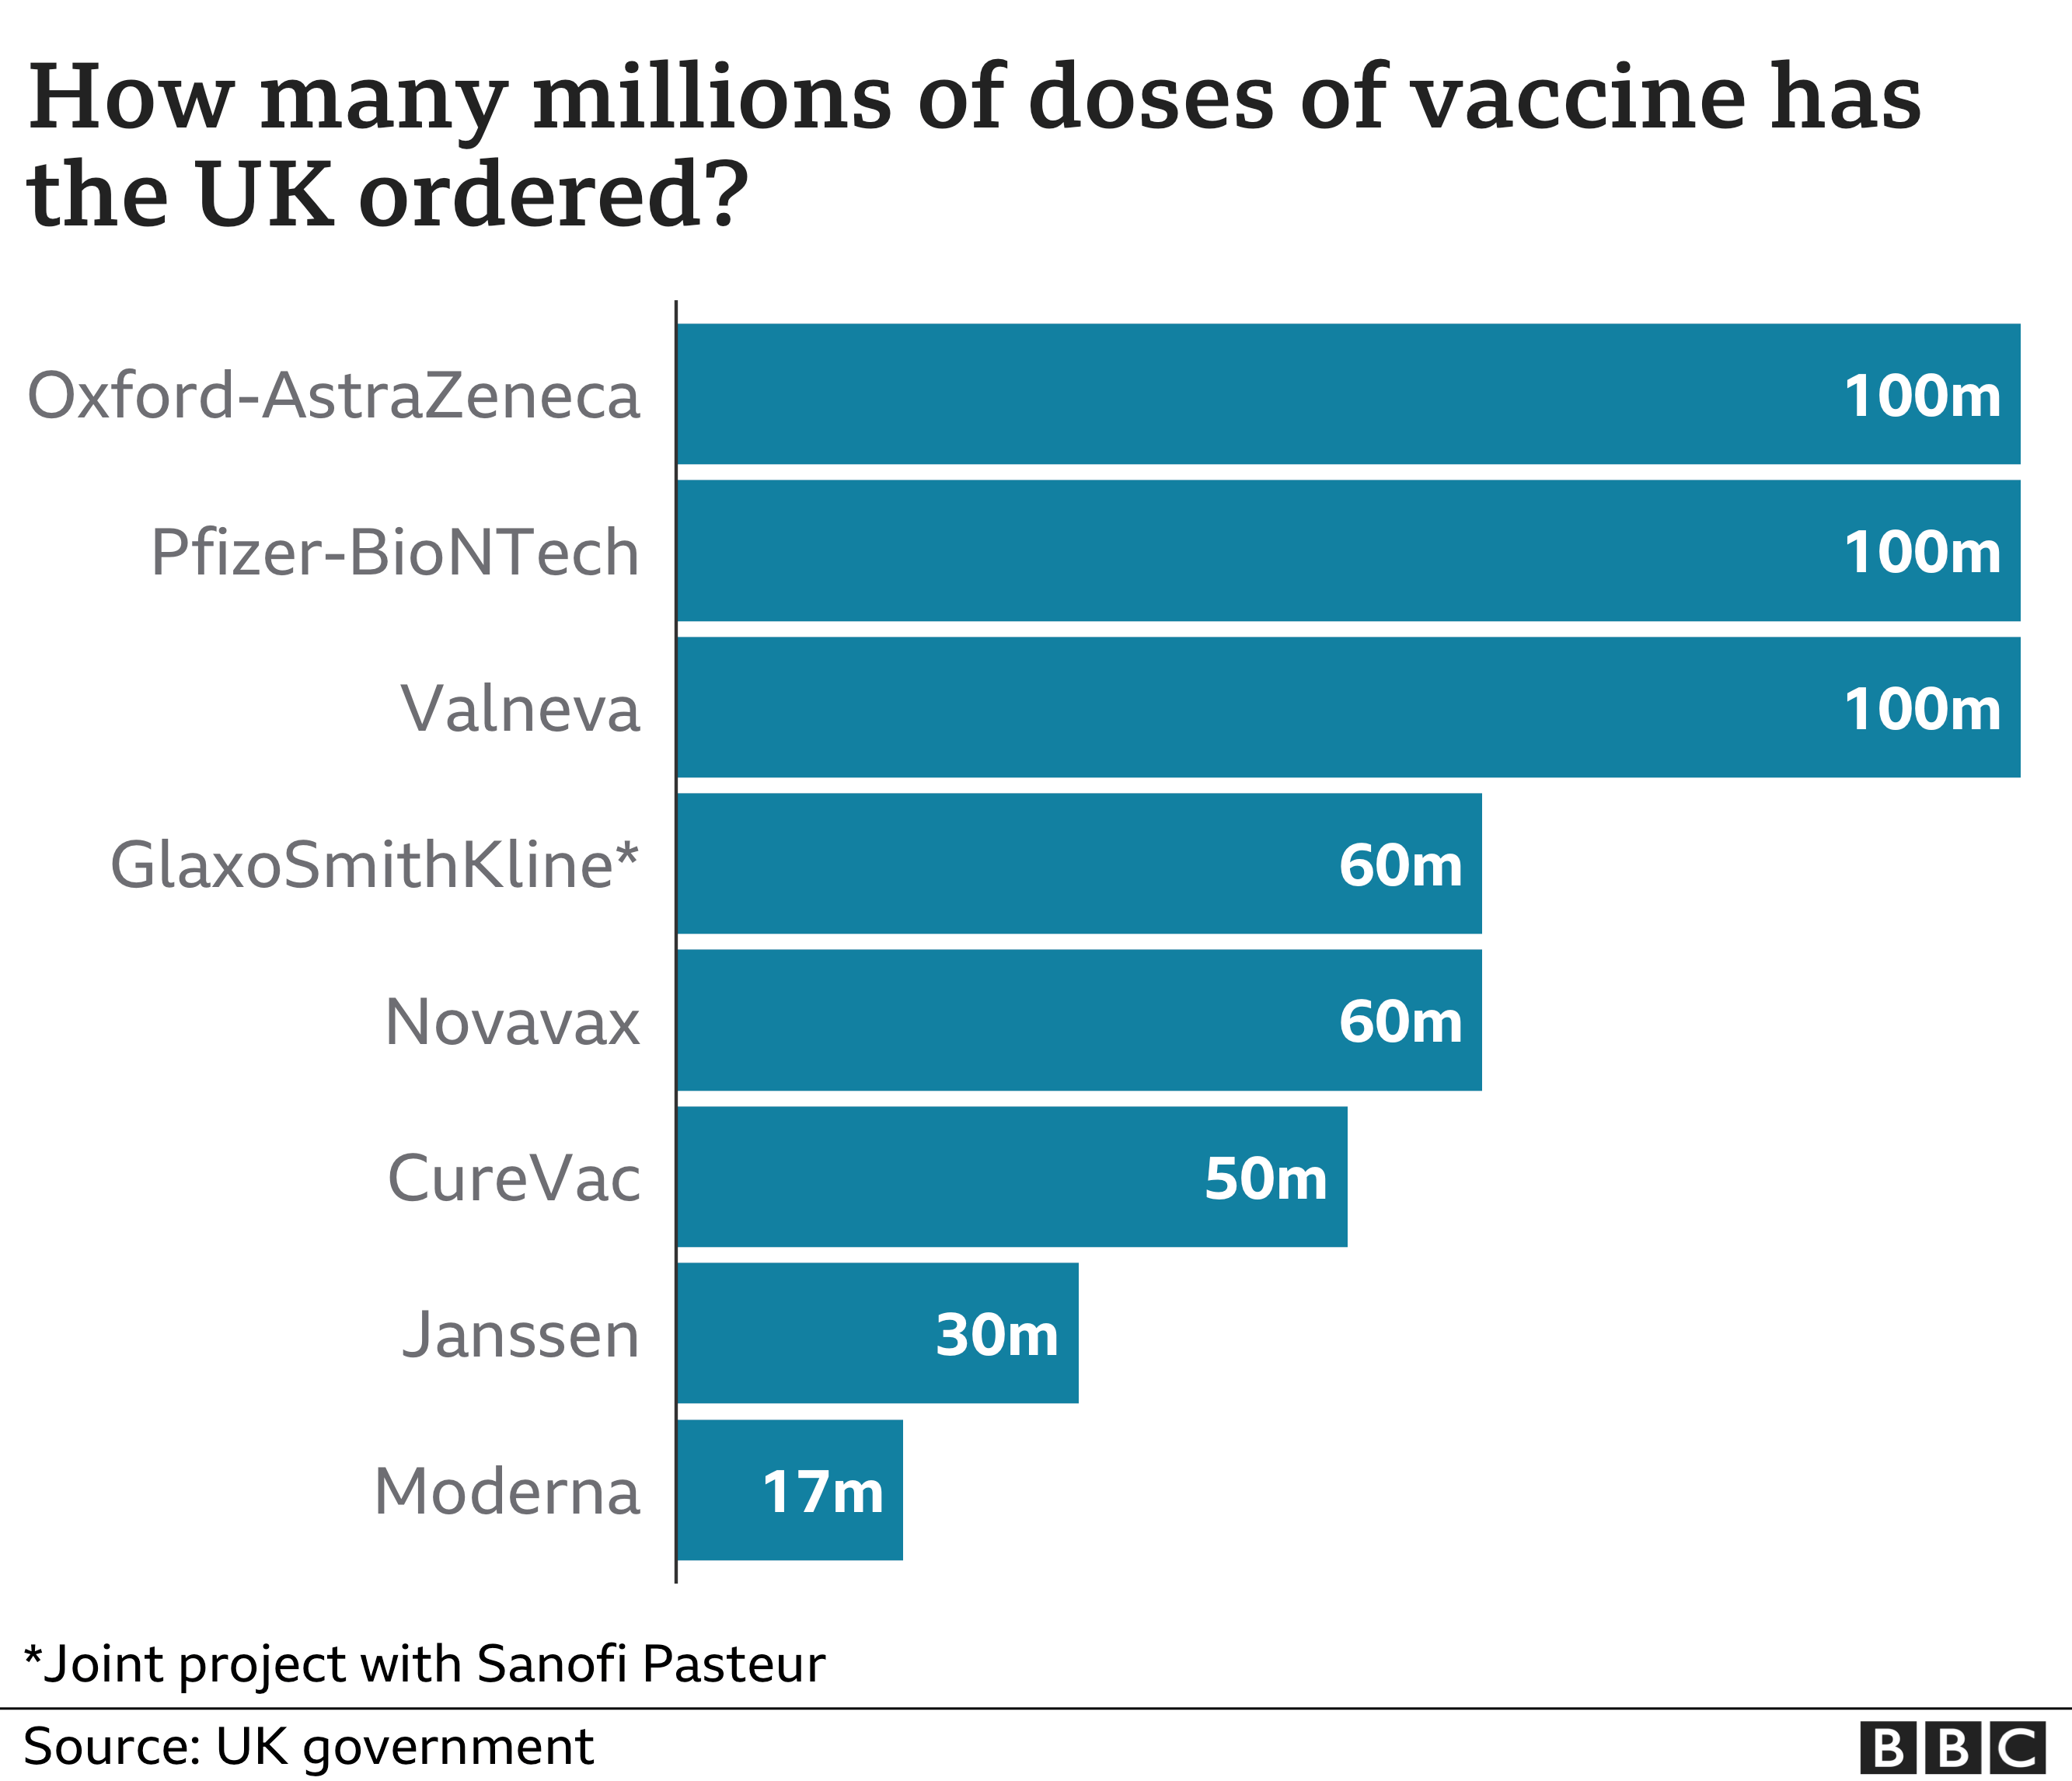 A chart showing the doses of vaccines in the UK to order